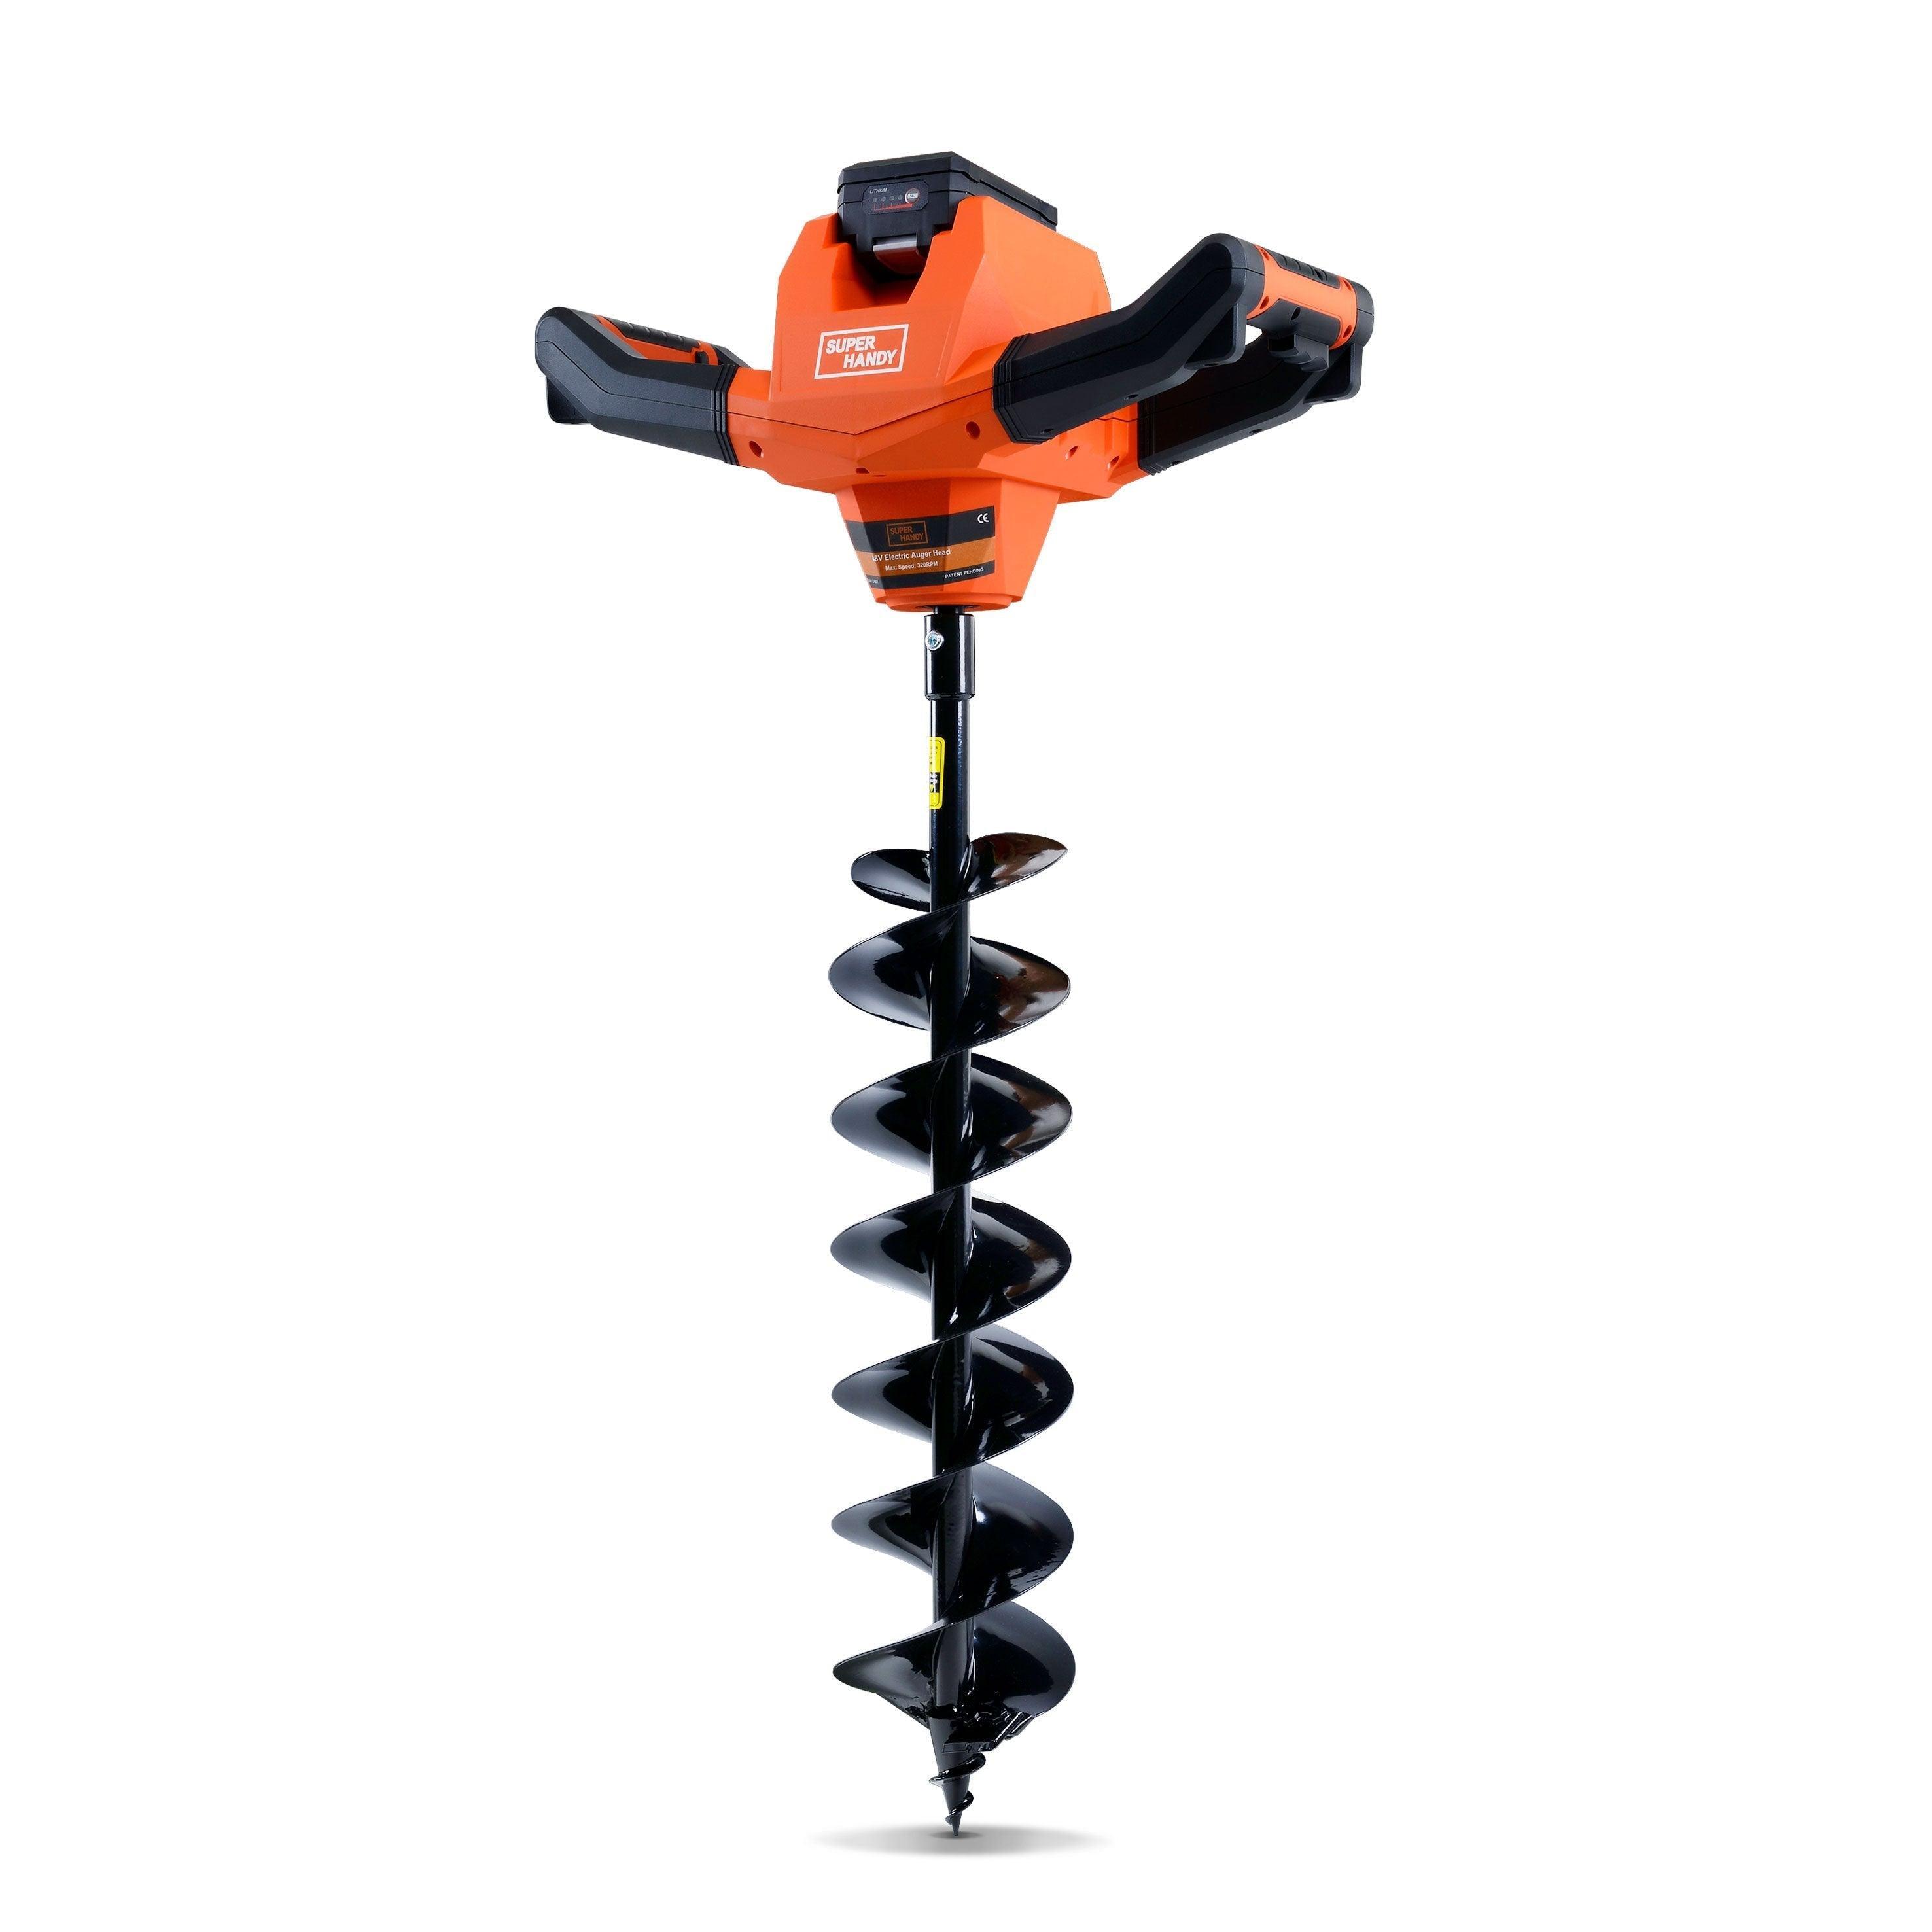 SuperHandy Electric Earth Auger and Drill Bit - 48V 2Ah Battery System, 6" x 30" Drill Bit, 3/4" Shaft - DIY Tools by GreatCircleUS